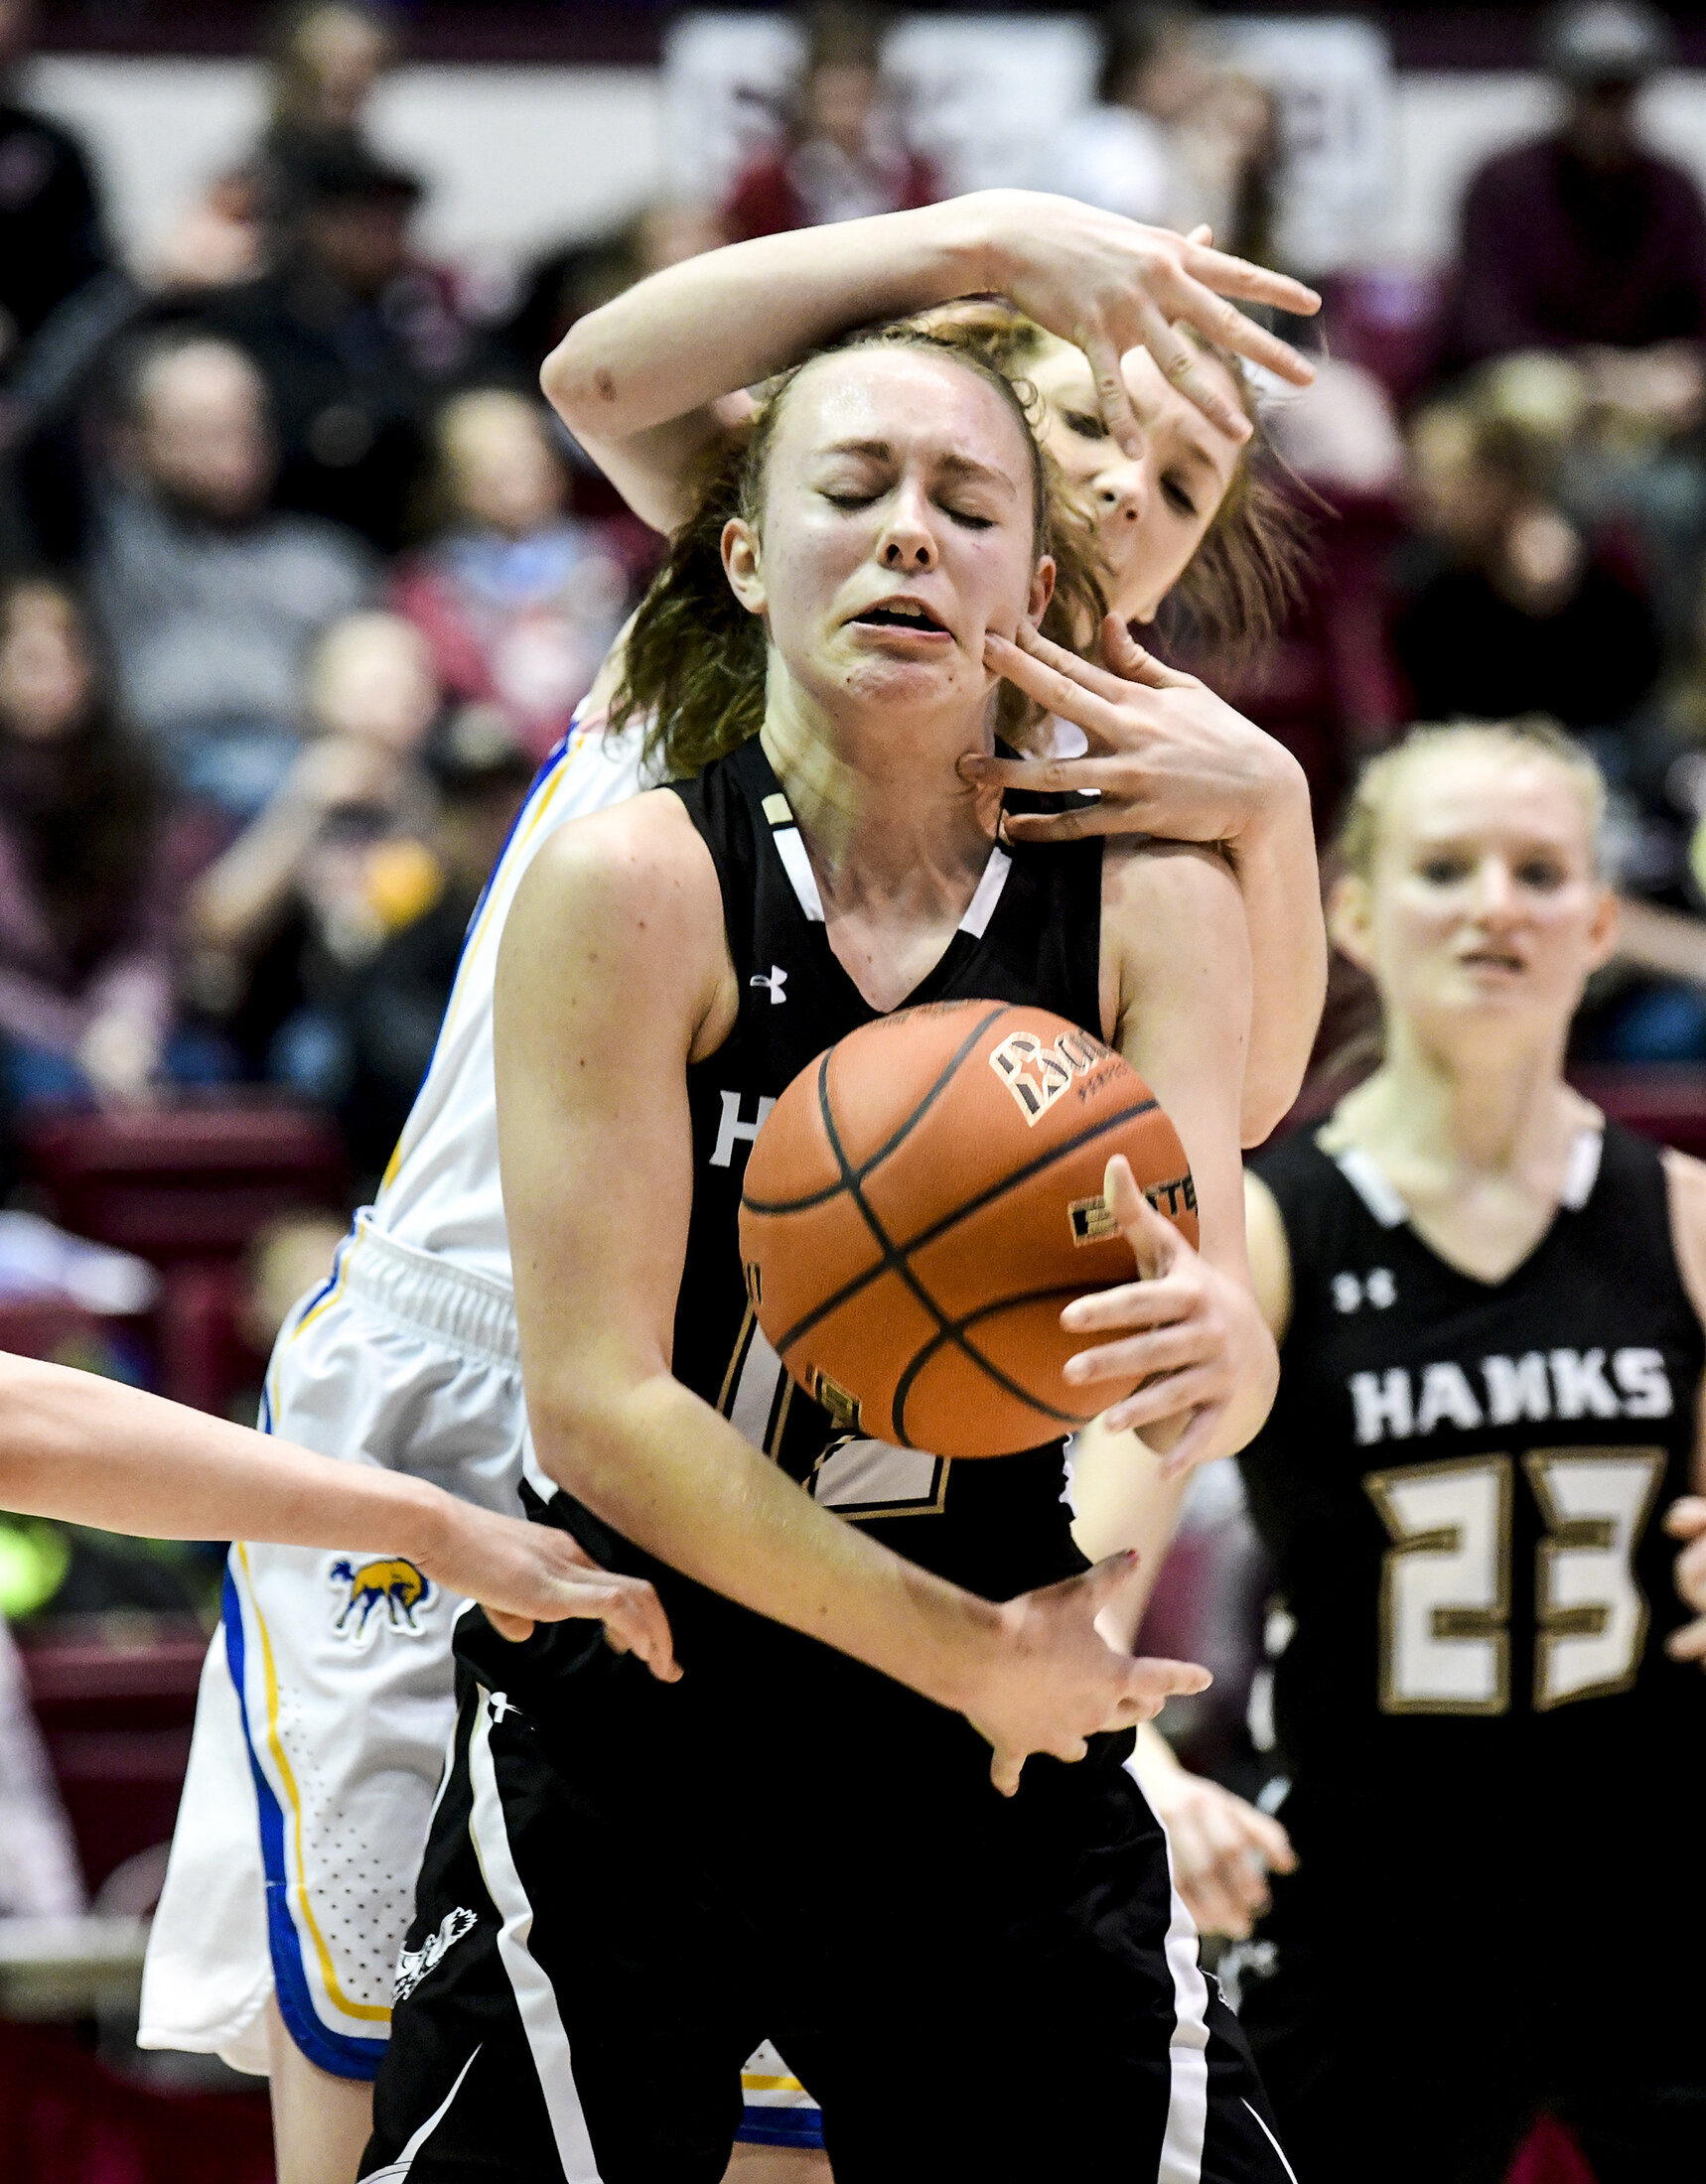  Seeley-Swan's Sariah Maughan, front, fumbles with the ball as Melstone's Kelsey Thurston, rear, reaches over her back during their Class C girls state quarterfinal basketball game at Dahlberg Arena, March 12, 2020 in Missoula, Mont. The Broncs defea